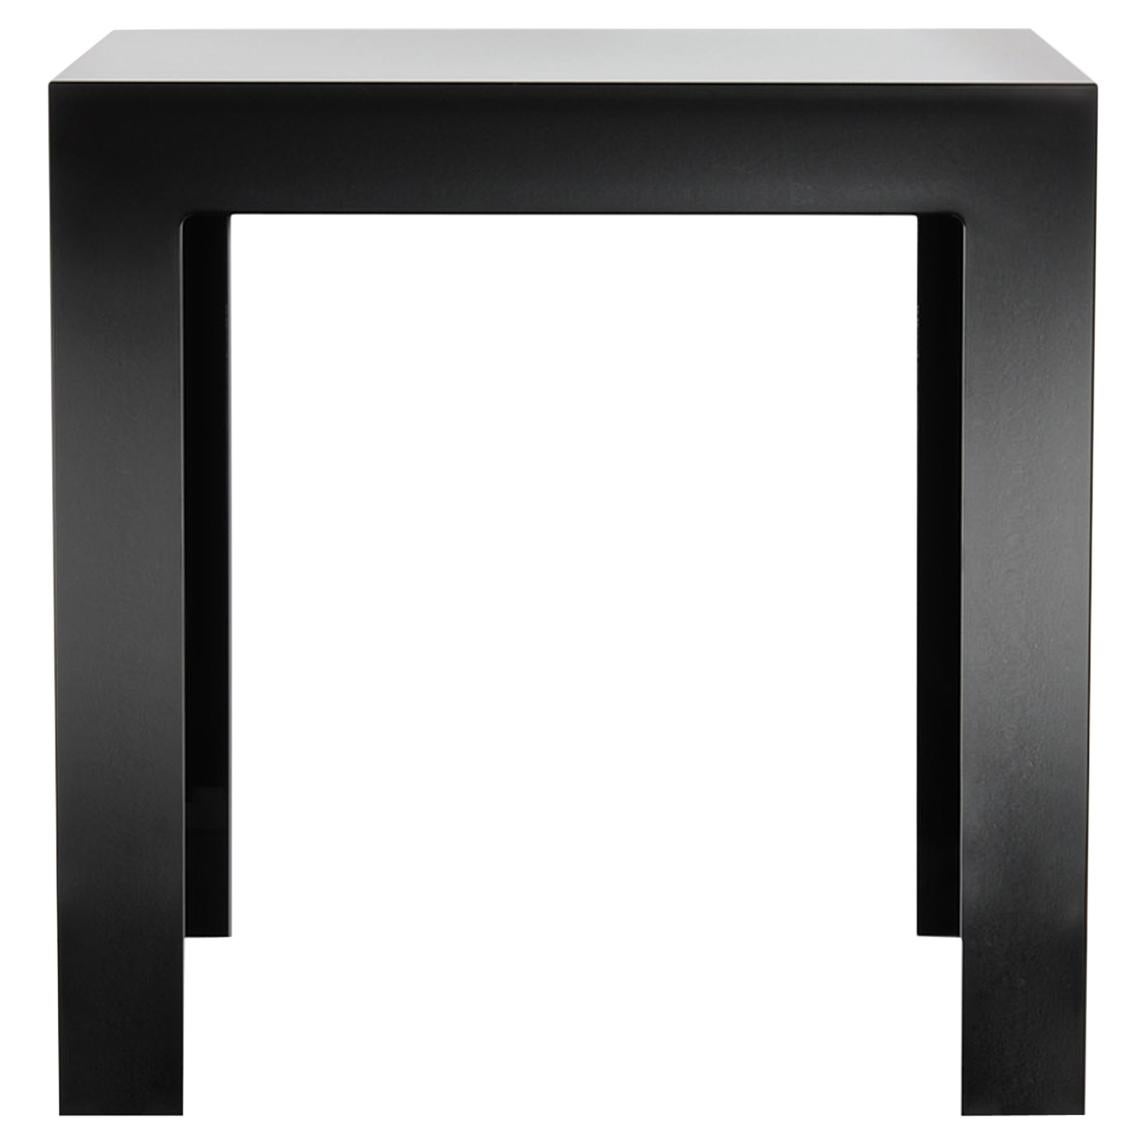 Kartell Jolly Side Table in Glossy Black by Paolo Rizzatto